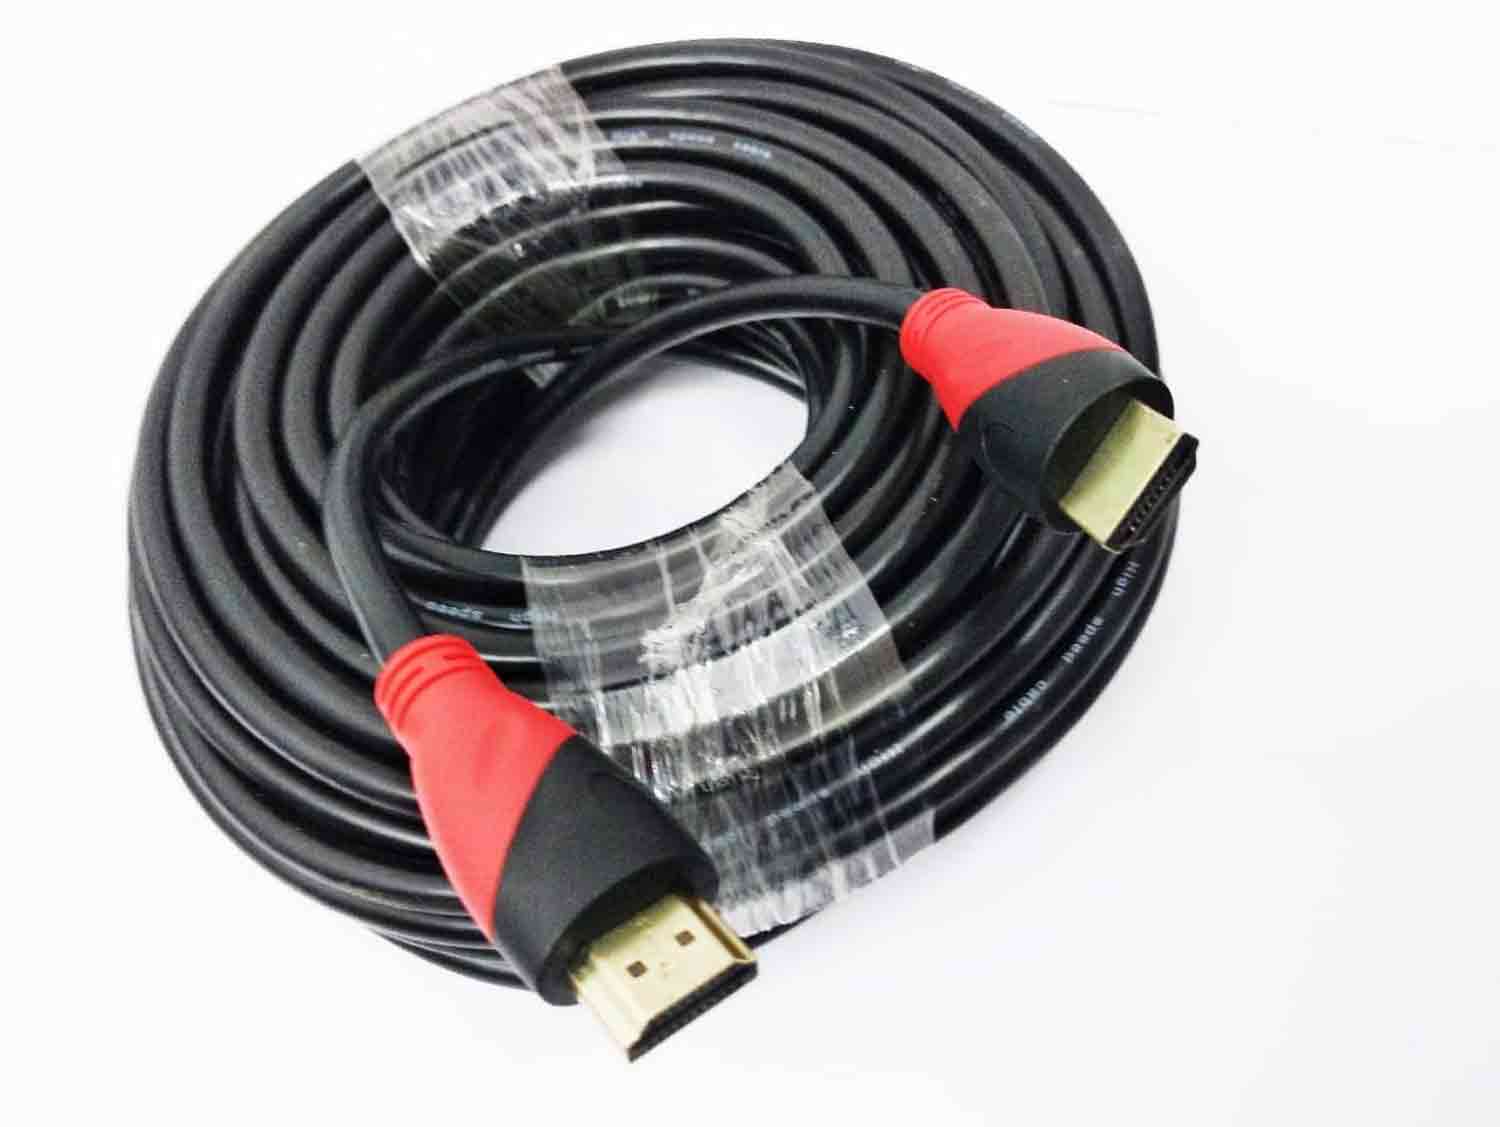 HDMI 2.0v 4K Cable 20 Meter - VCOM used in a live streaming setup